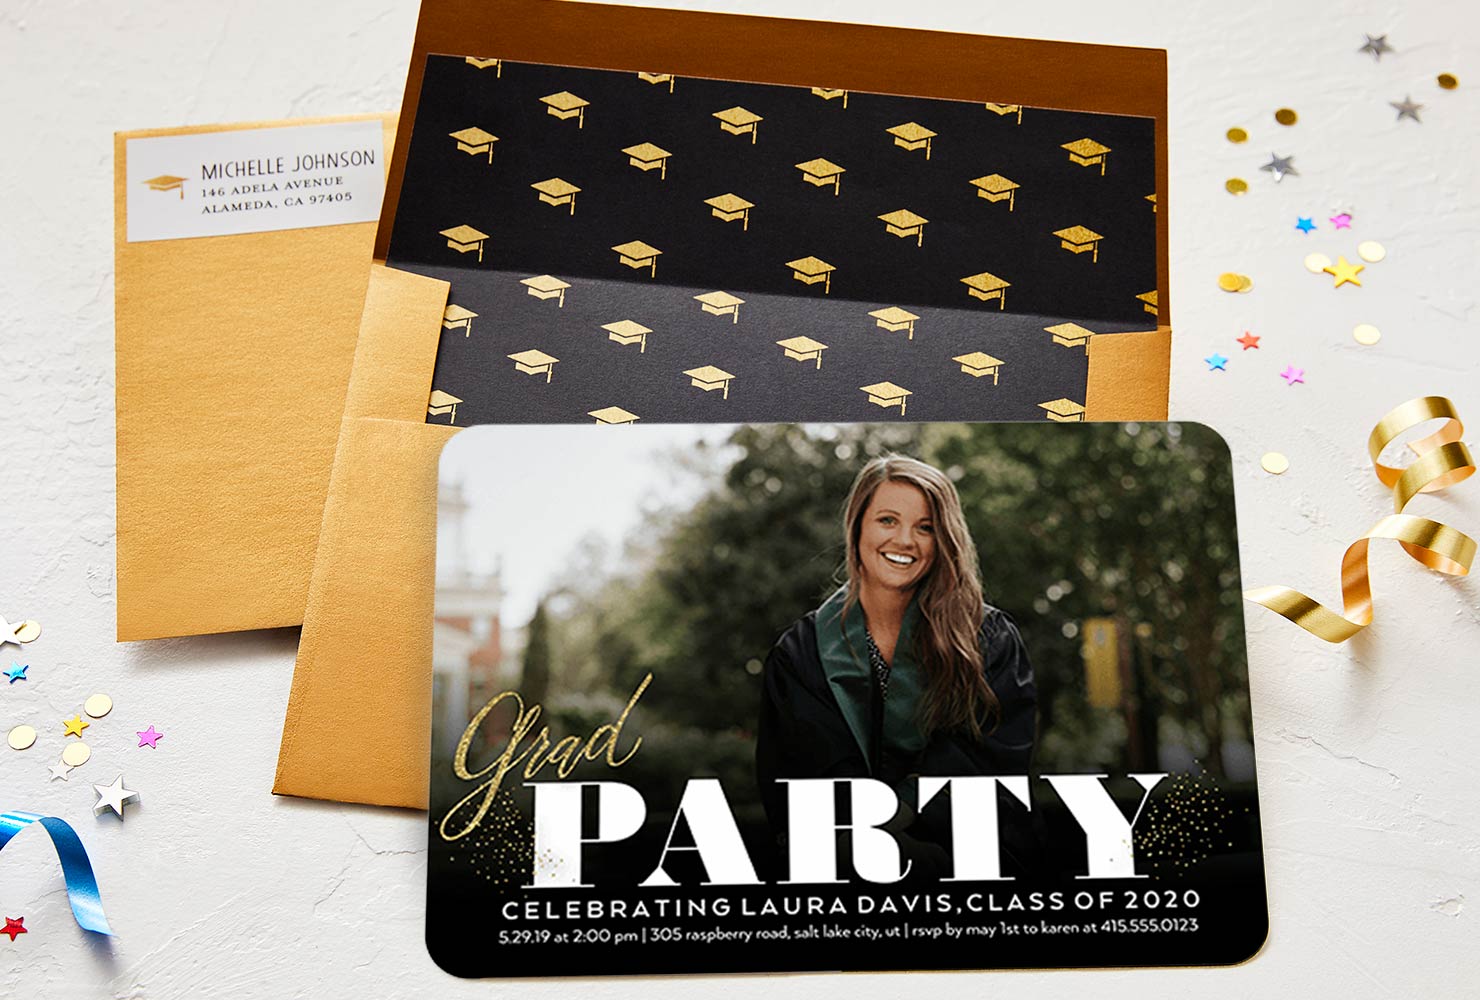 Graduation party invitation with photo of young girl